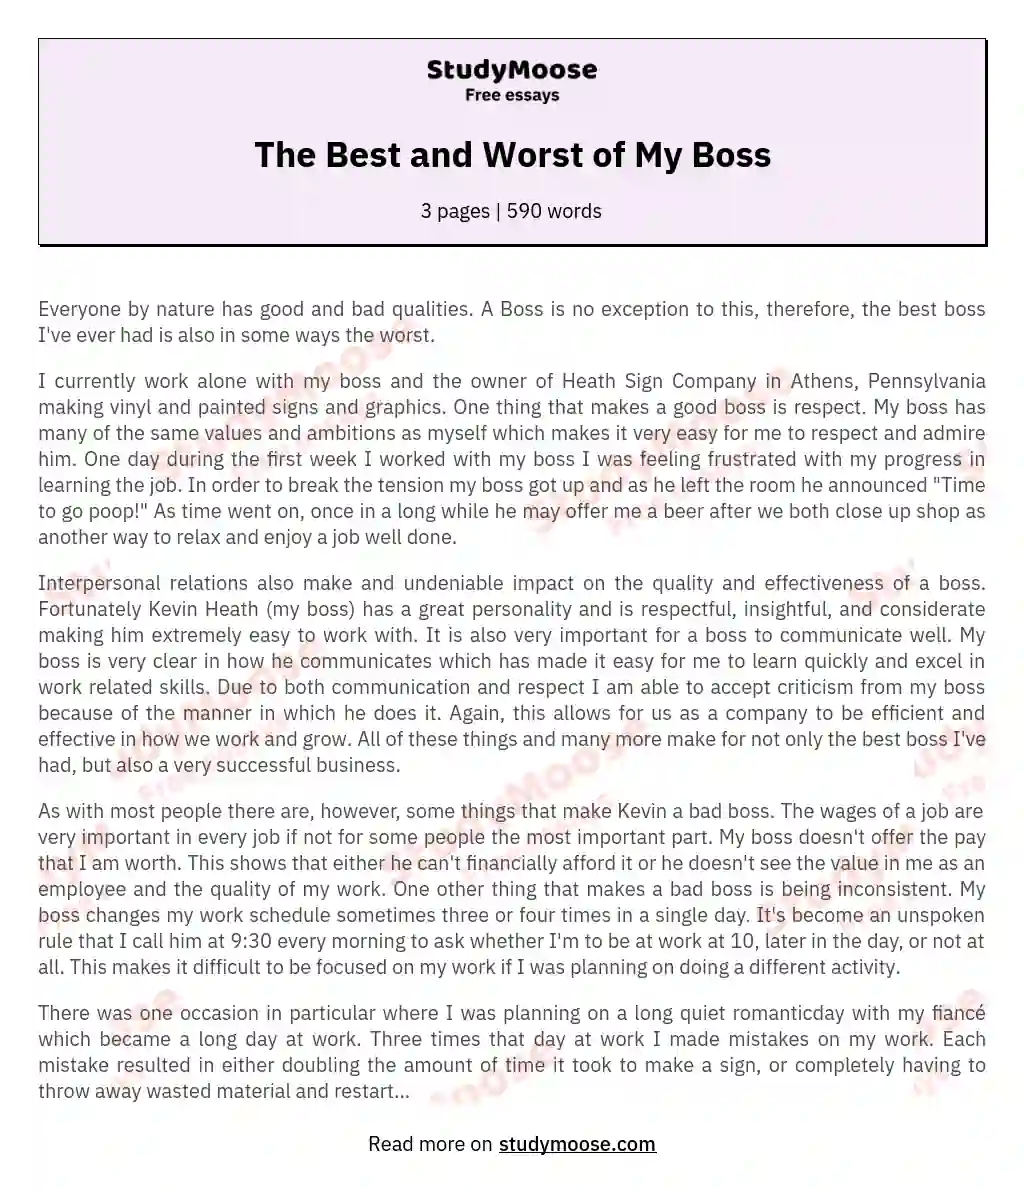 The Best and Worst of My Boss essay